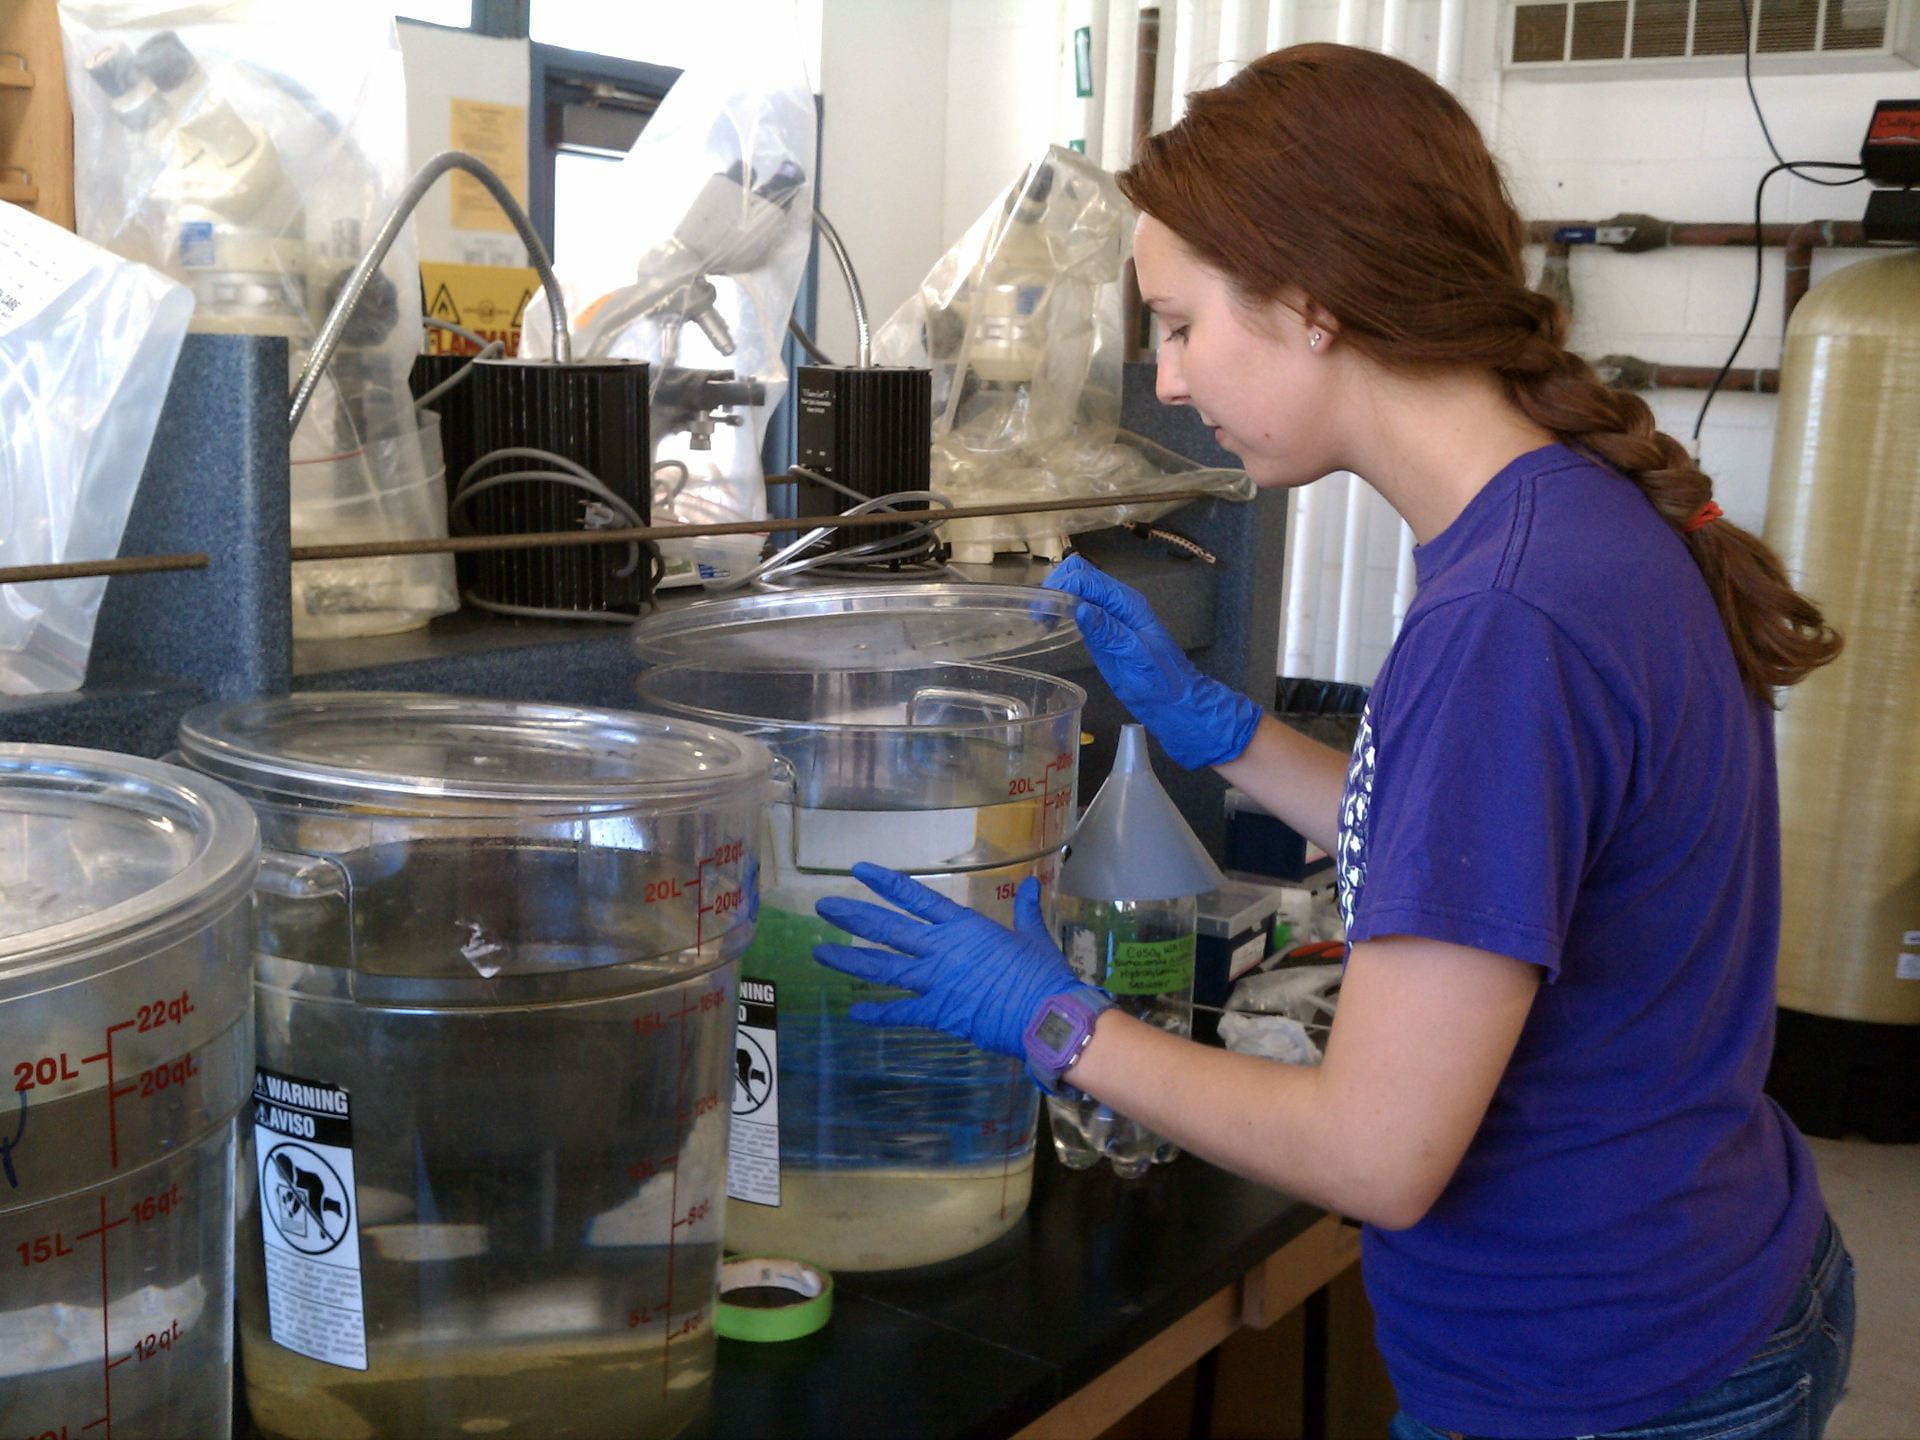 A USC student conducting experiments in a science lab.